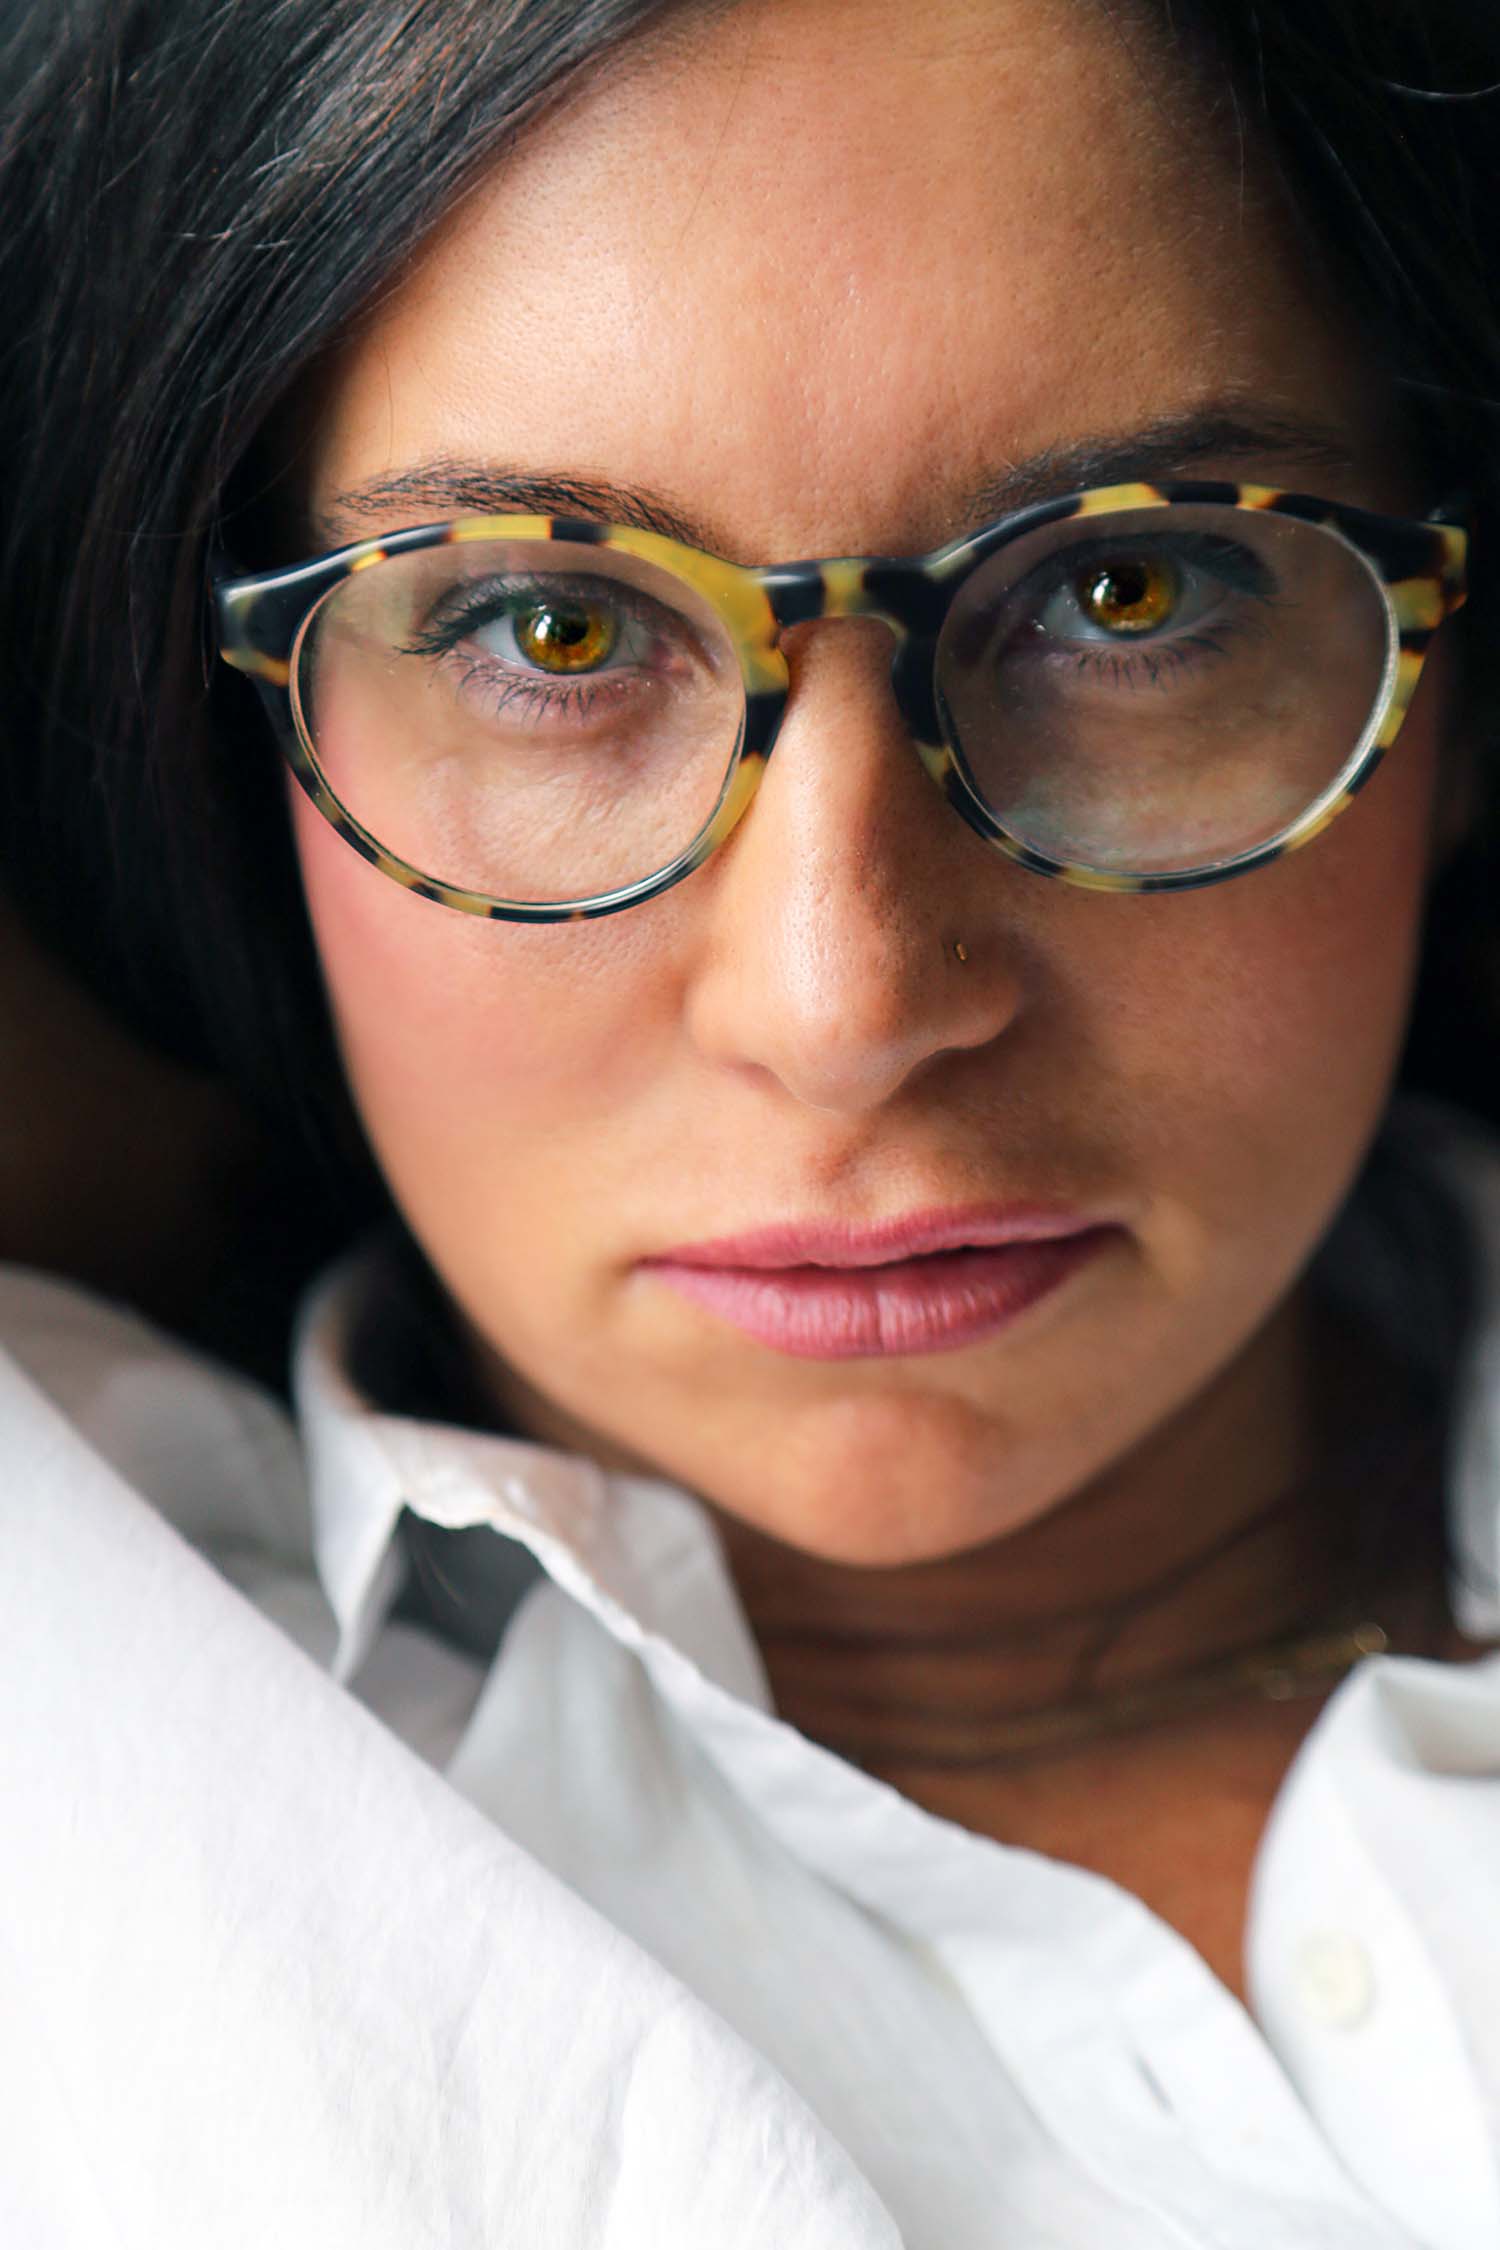 headshot of Lisa Taddeo in turtleshell glasses and a white collared shirt